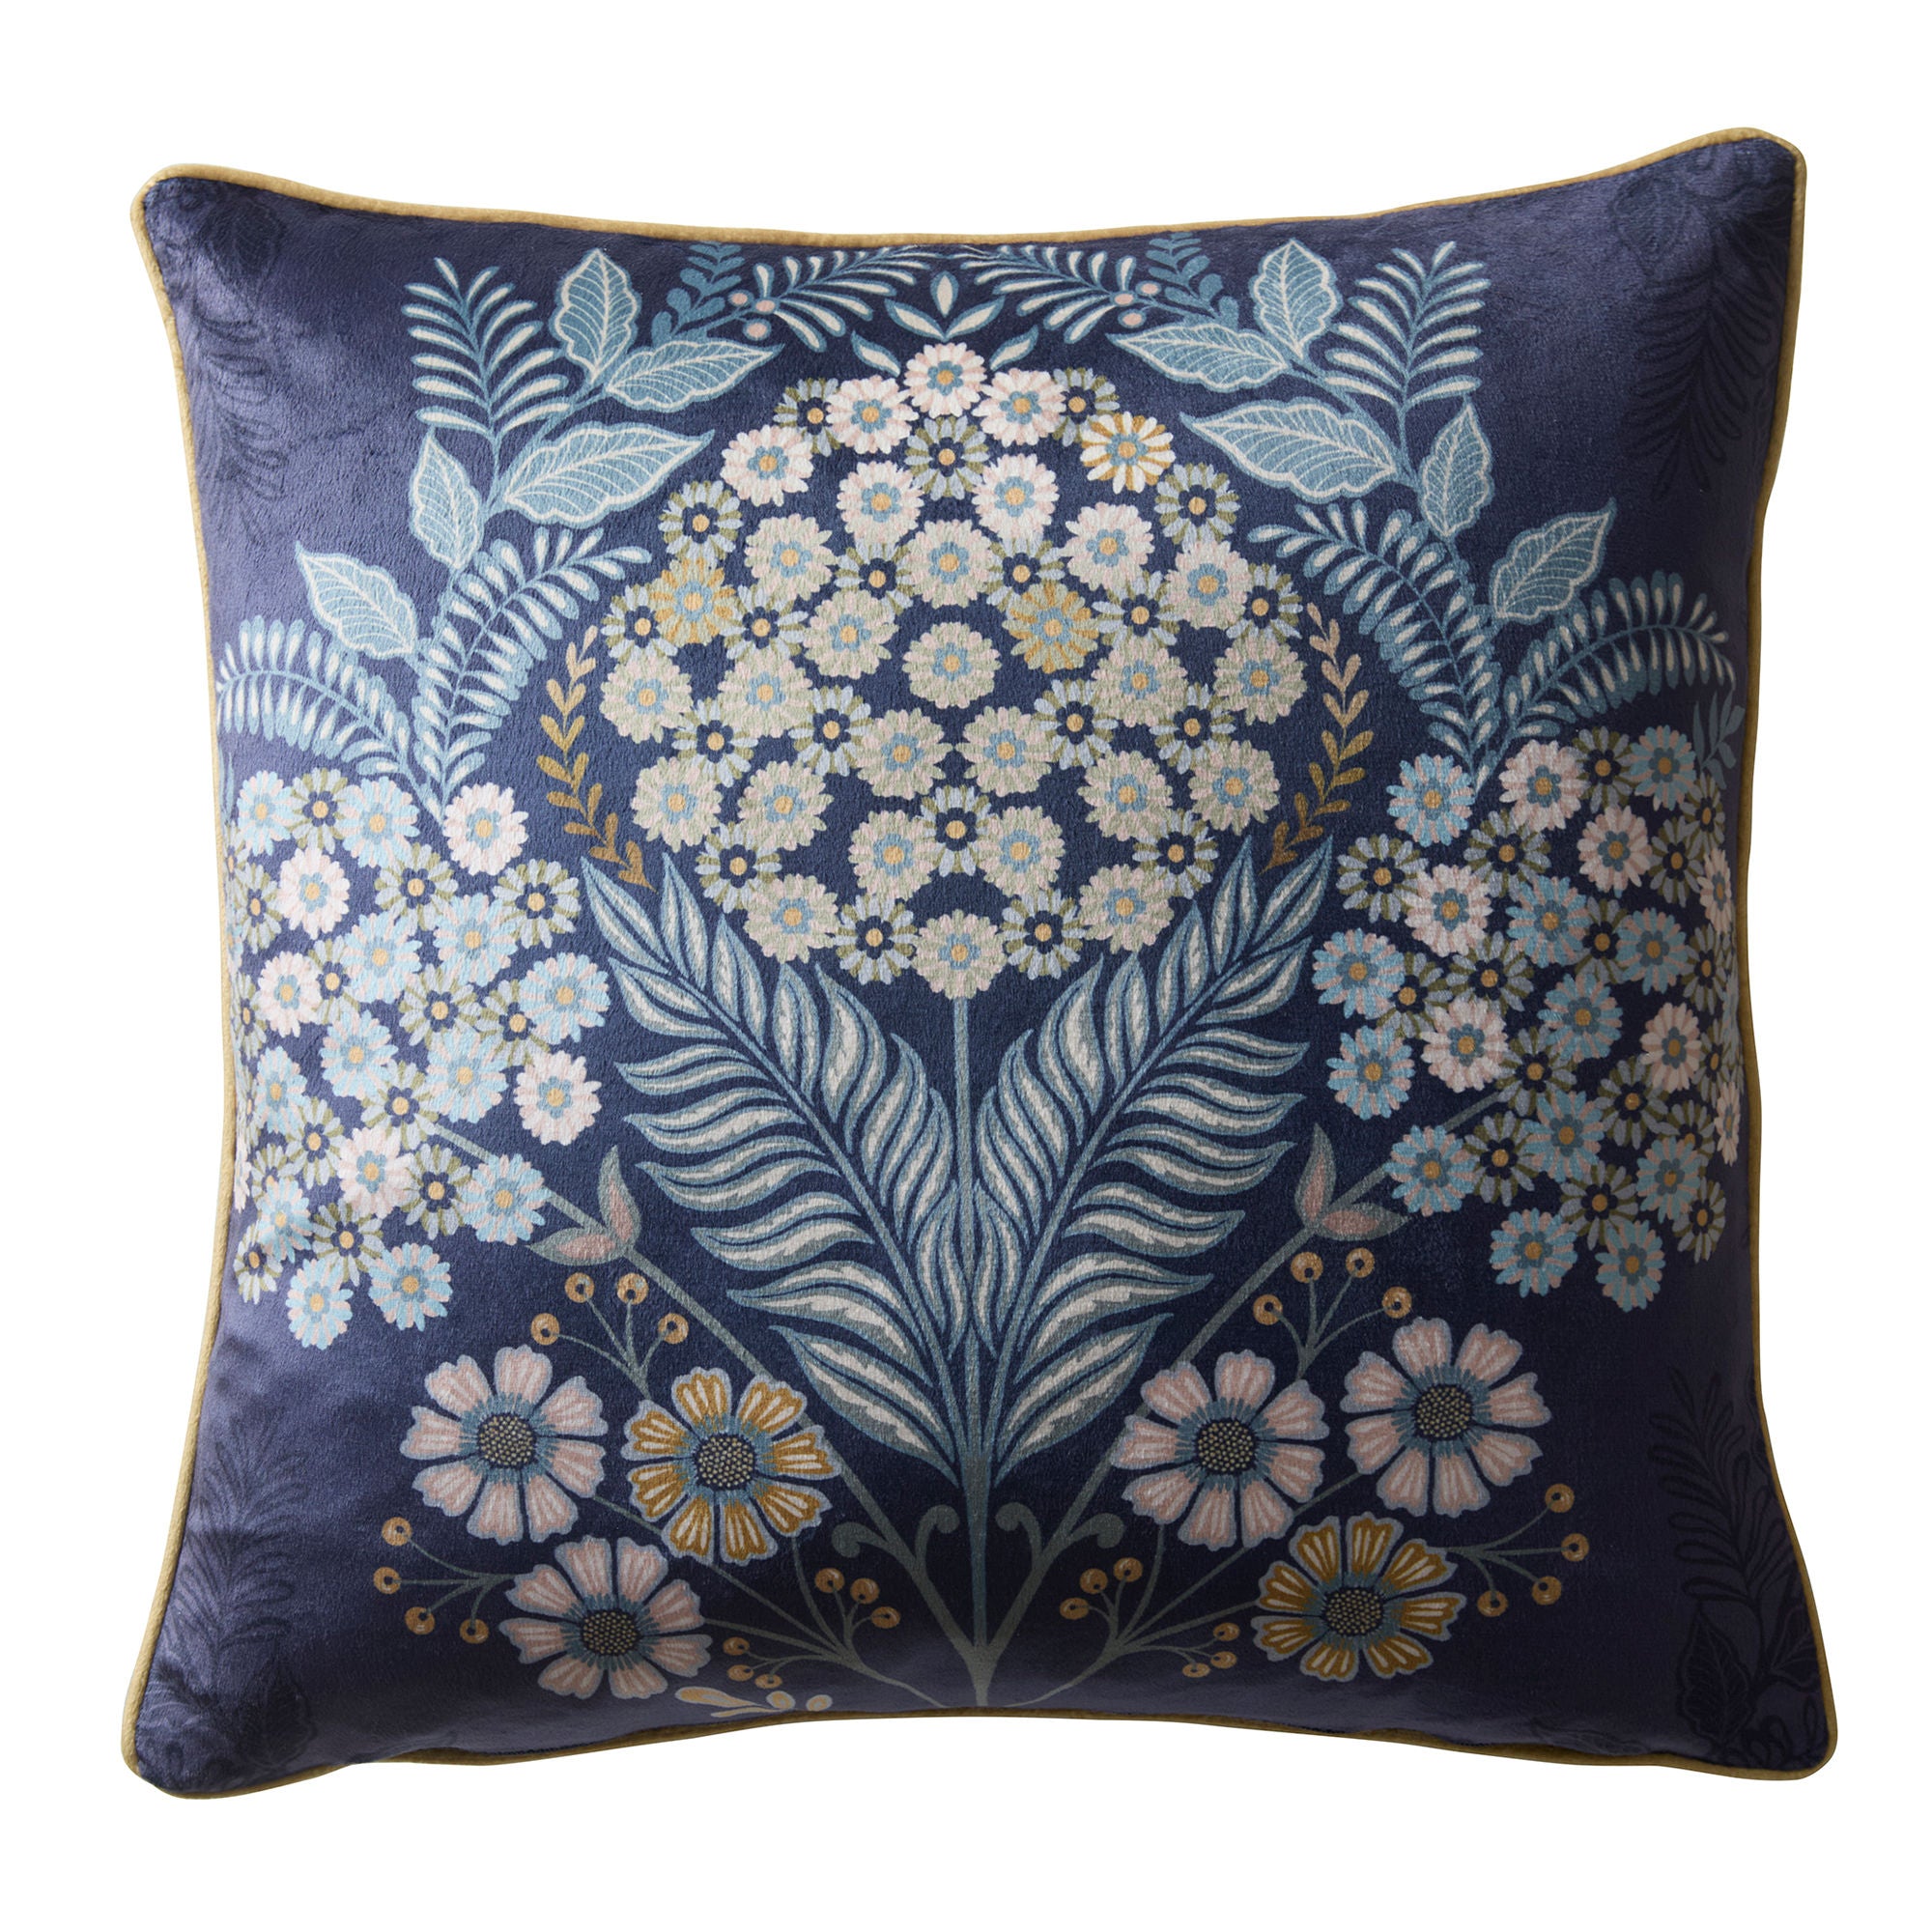 Evelina Cushion by Appletree Heritage in Navy 43 x 43cm - Cushion - Appletree Heritage